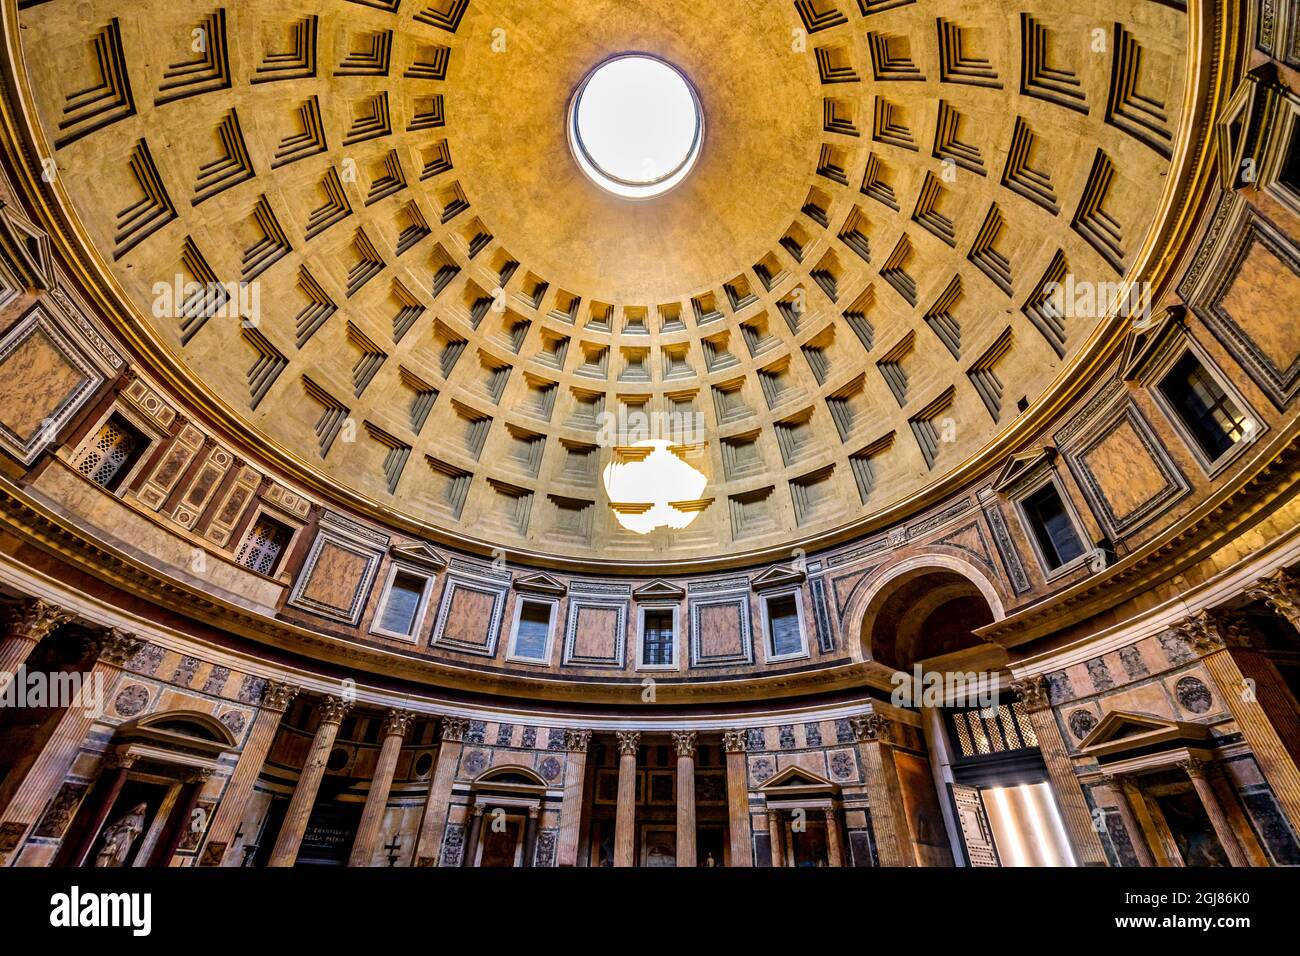 Dome Oculus Pantheon, Rome, Hadrian in 118 to 125 AD Became oldest Roman church in 609 AD. Oculus, hole, provides only light Stock Photo Alamy